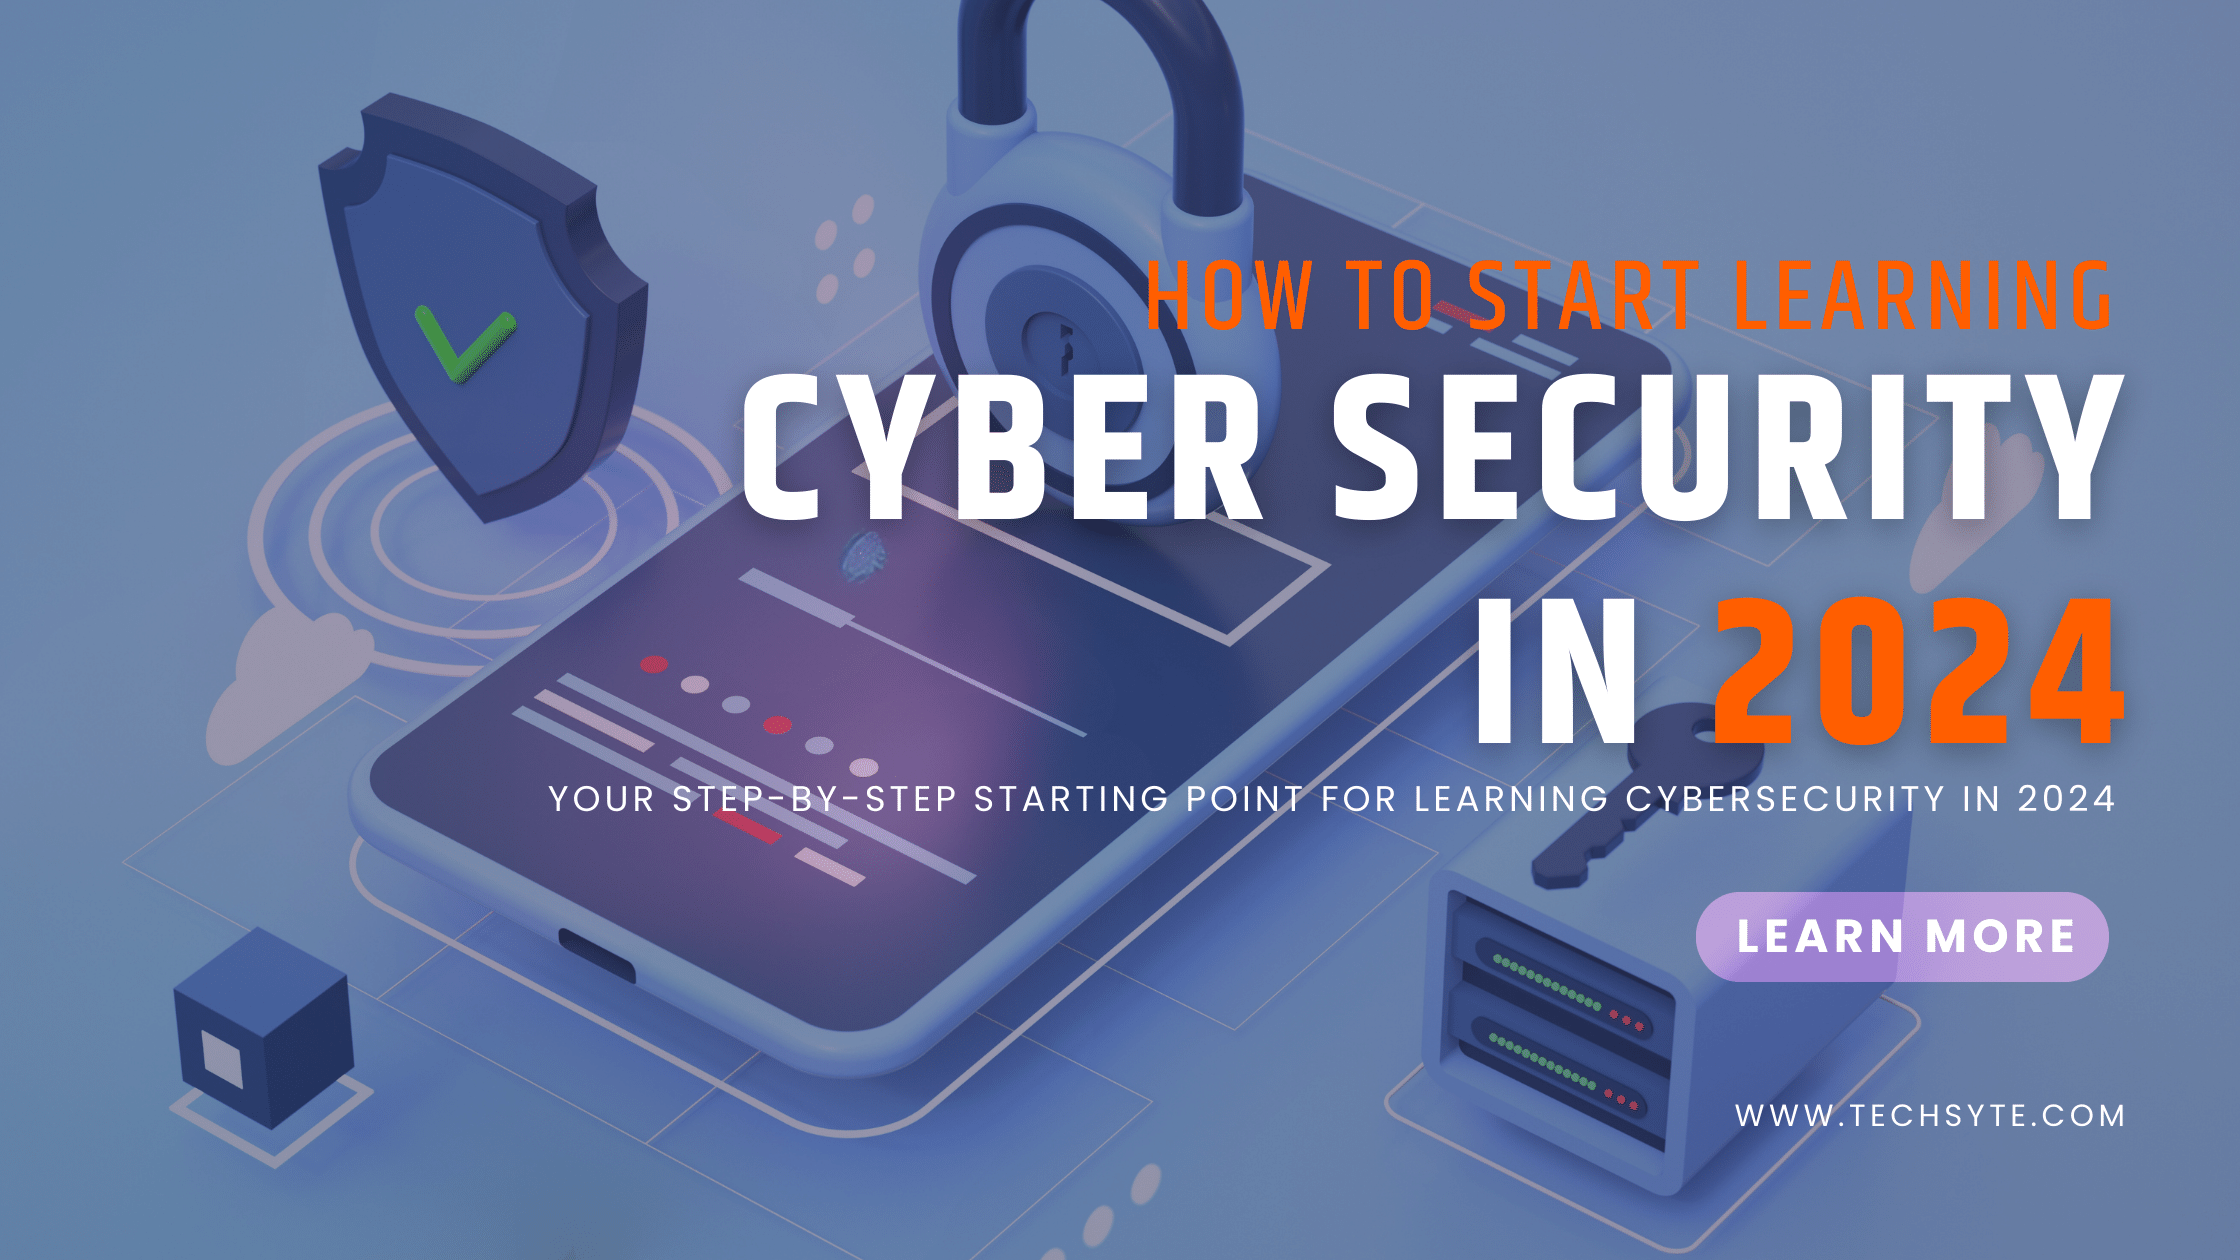 How to Start Learning Cyber Security in 2023